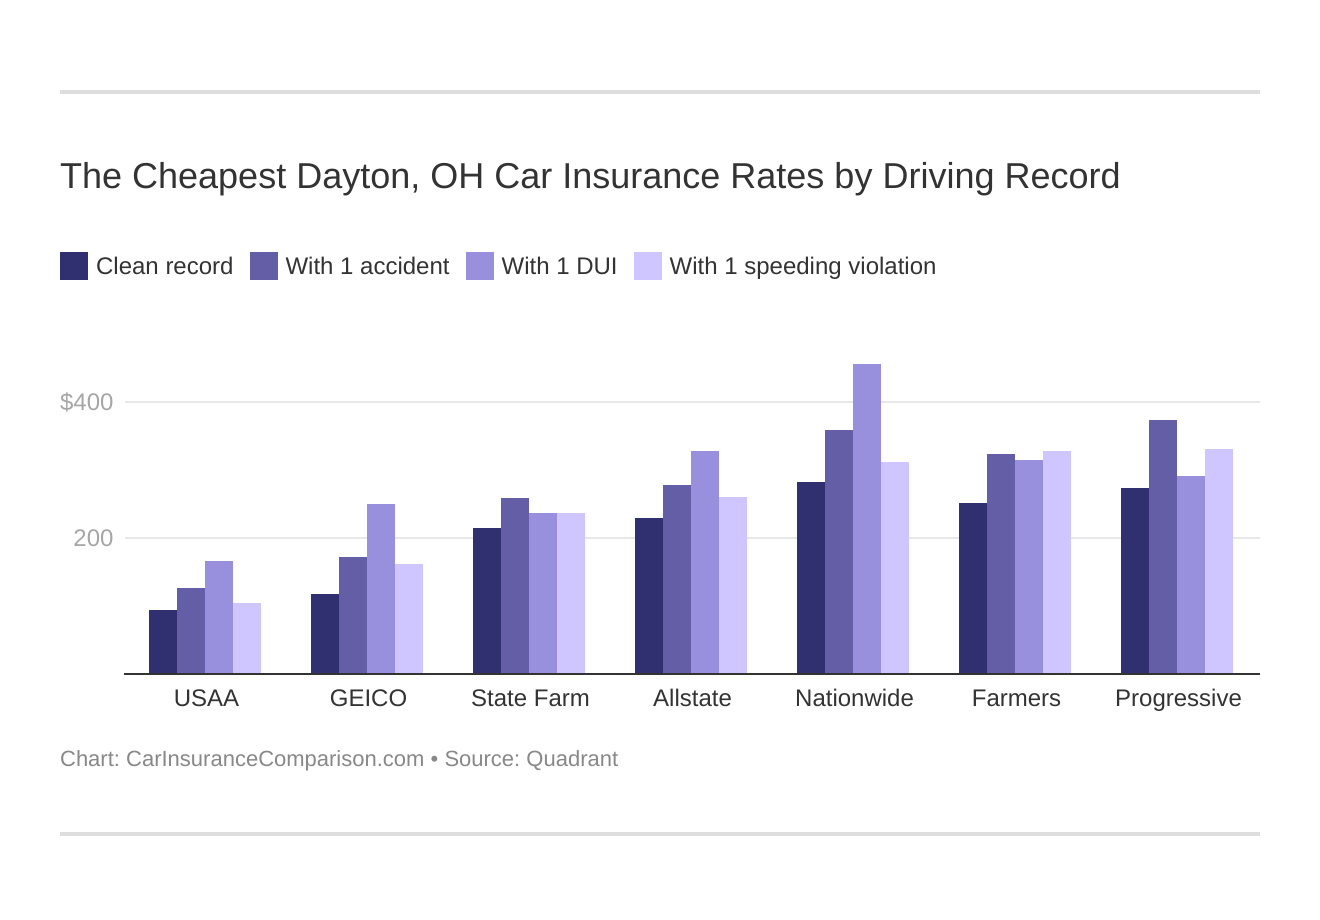 The Cheapest Dayton, OH Car Insurance Rates by Driving Record